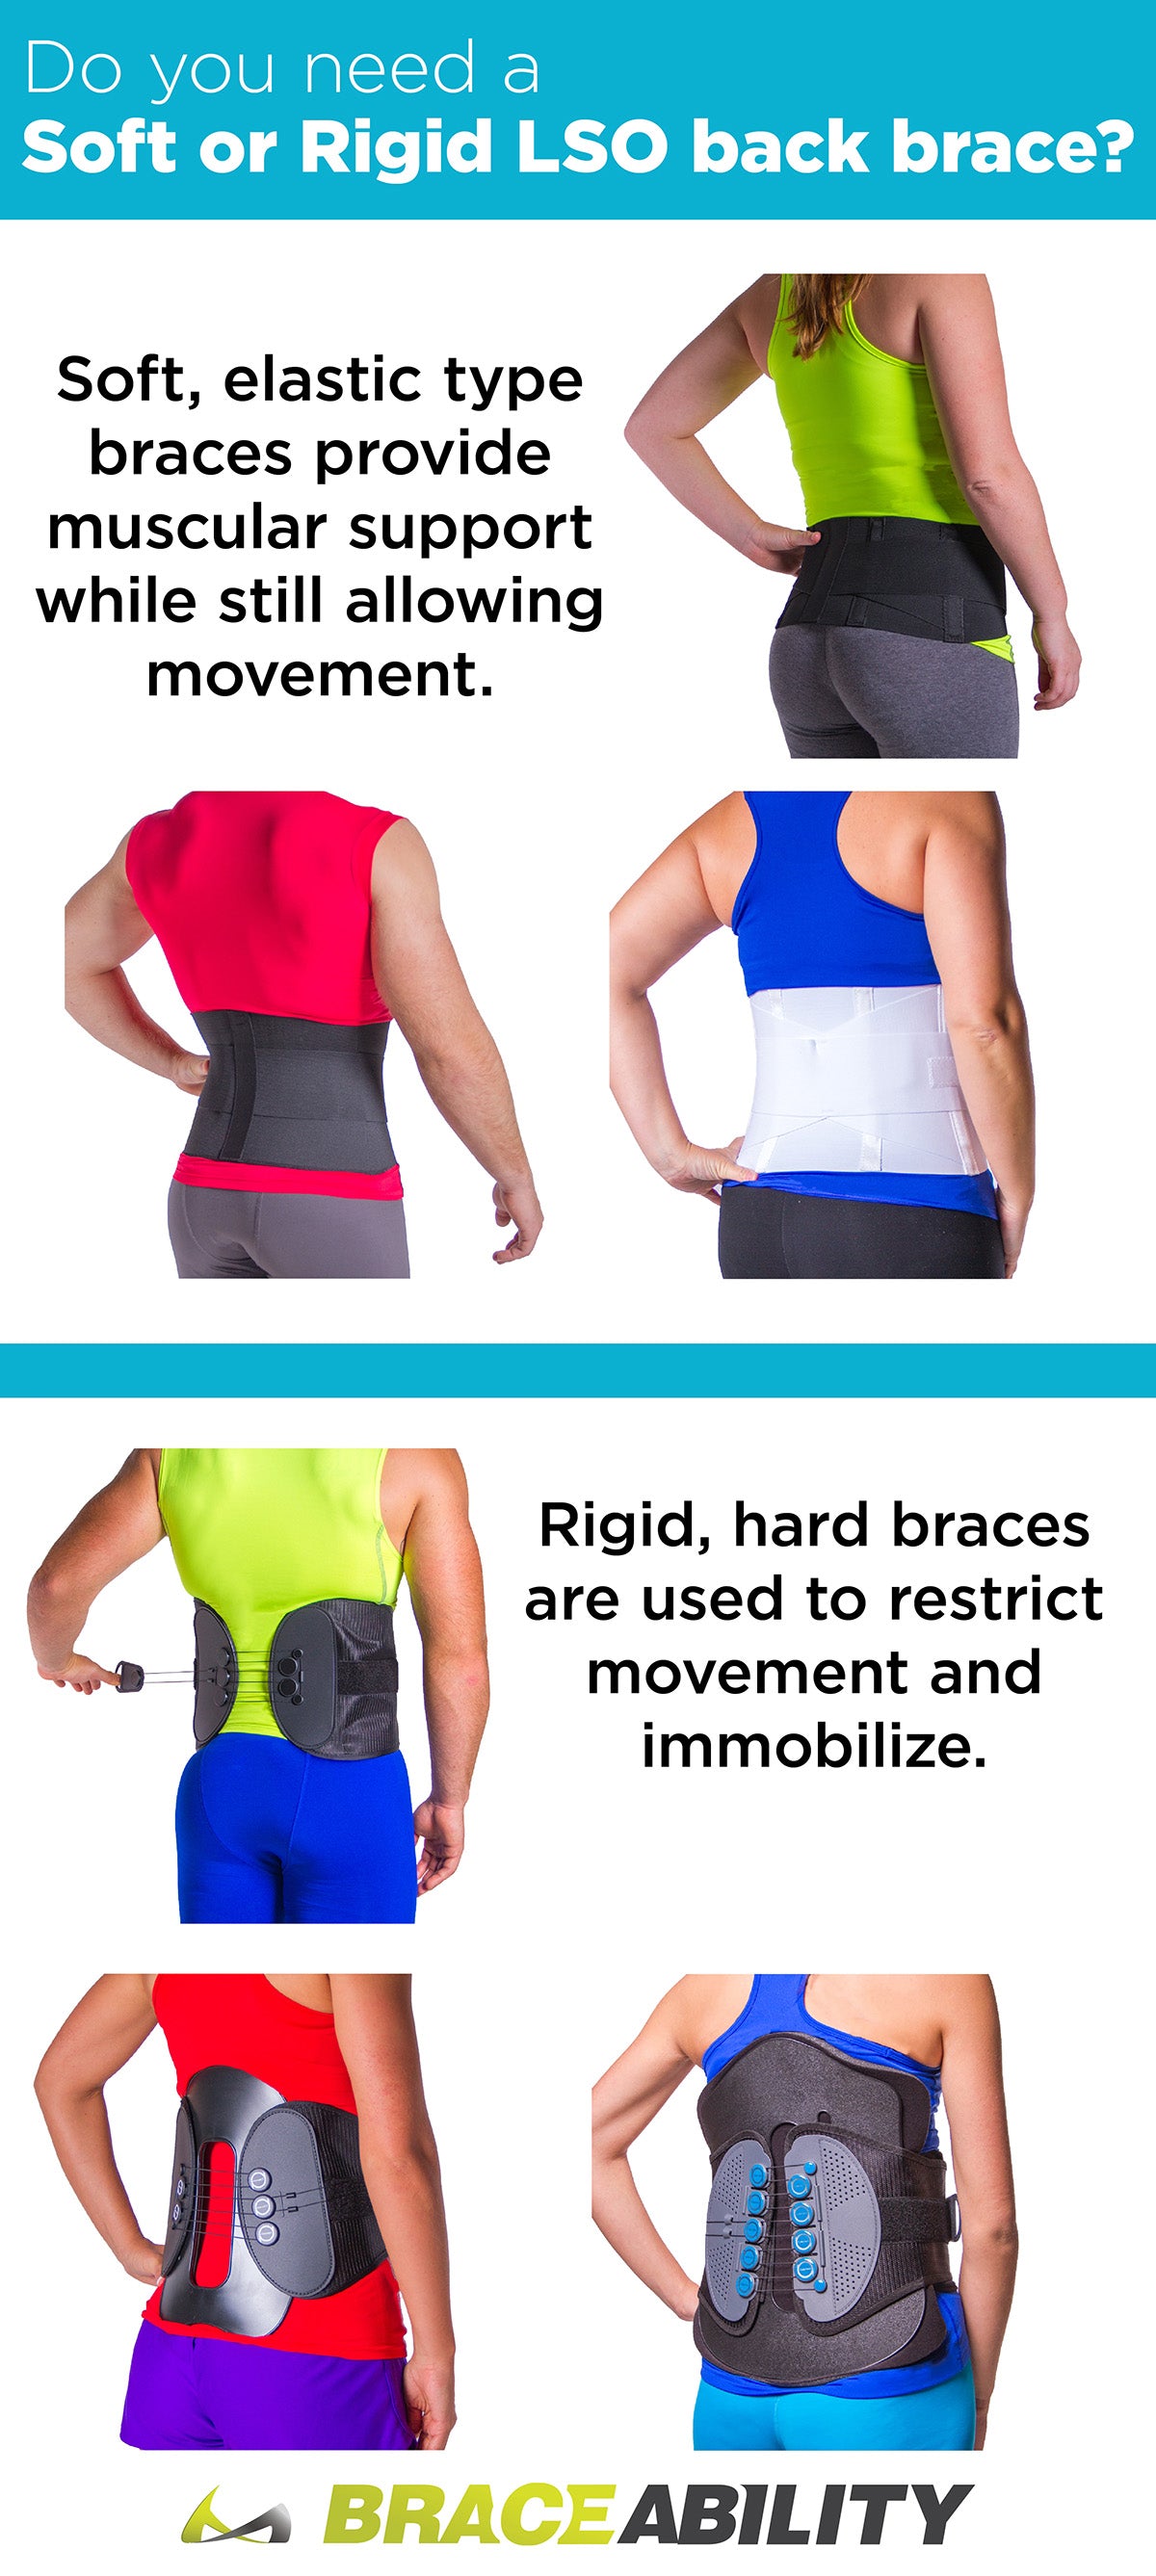 How to tell if you need to use a soft corset or rigid LSO for lumbosacral injuries